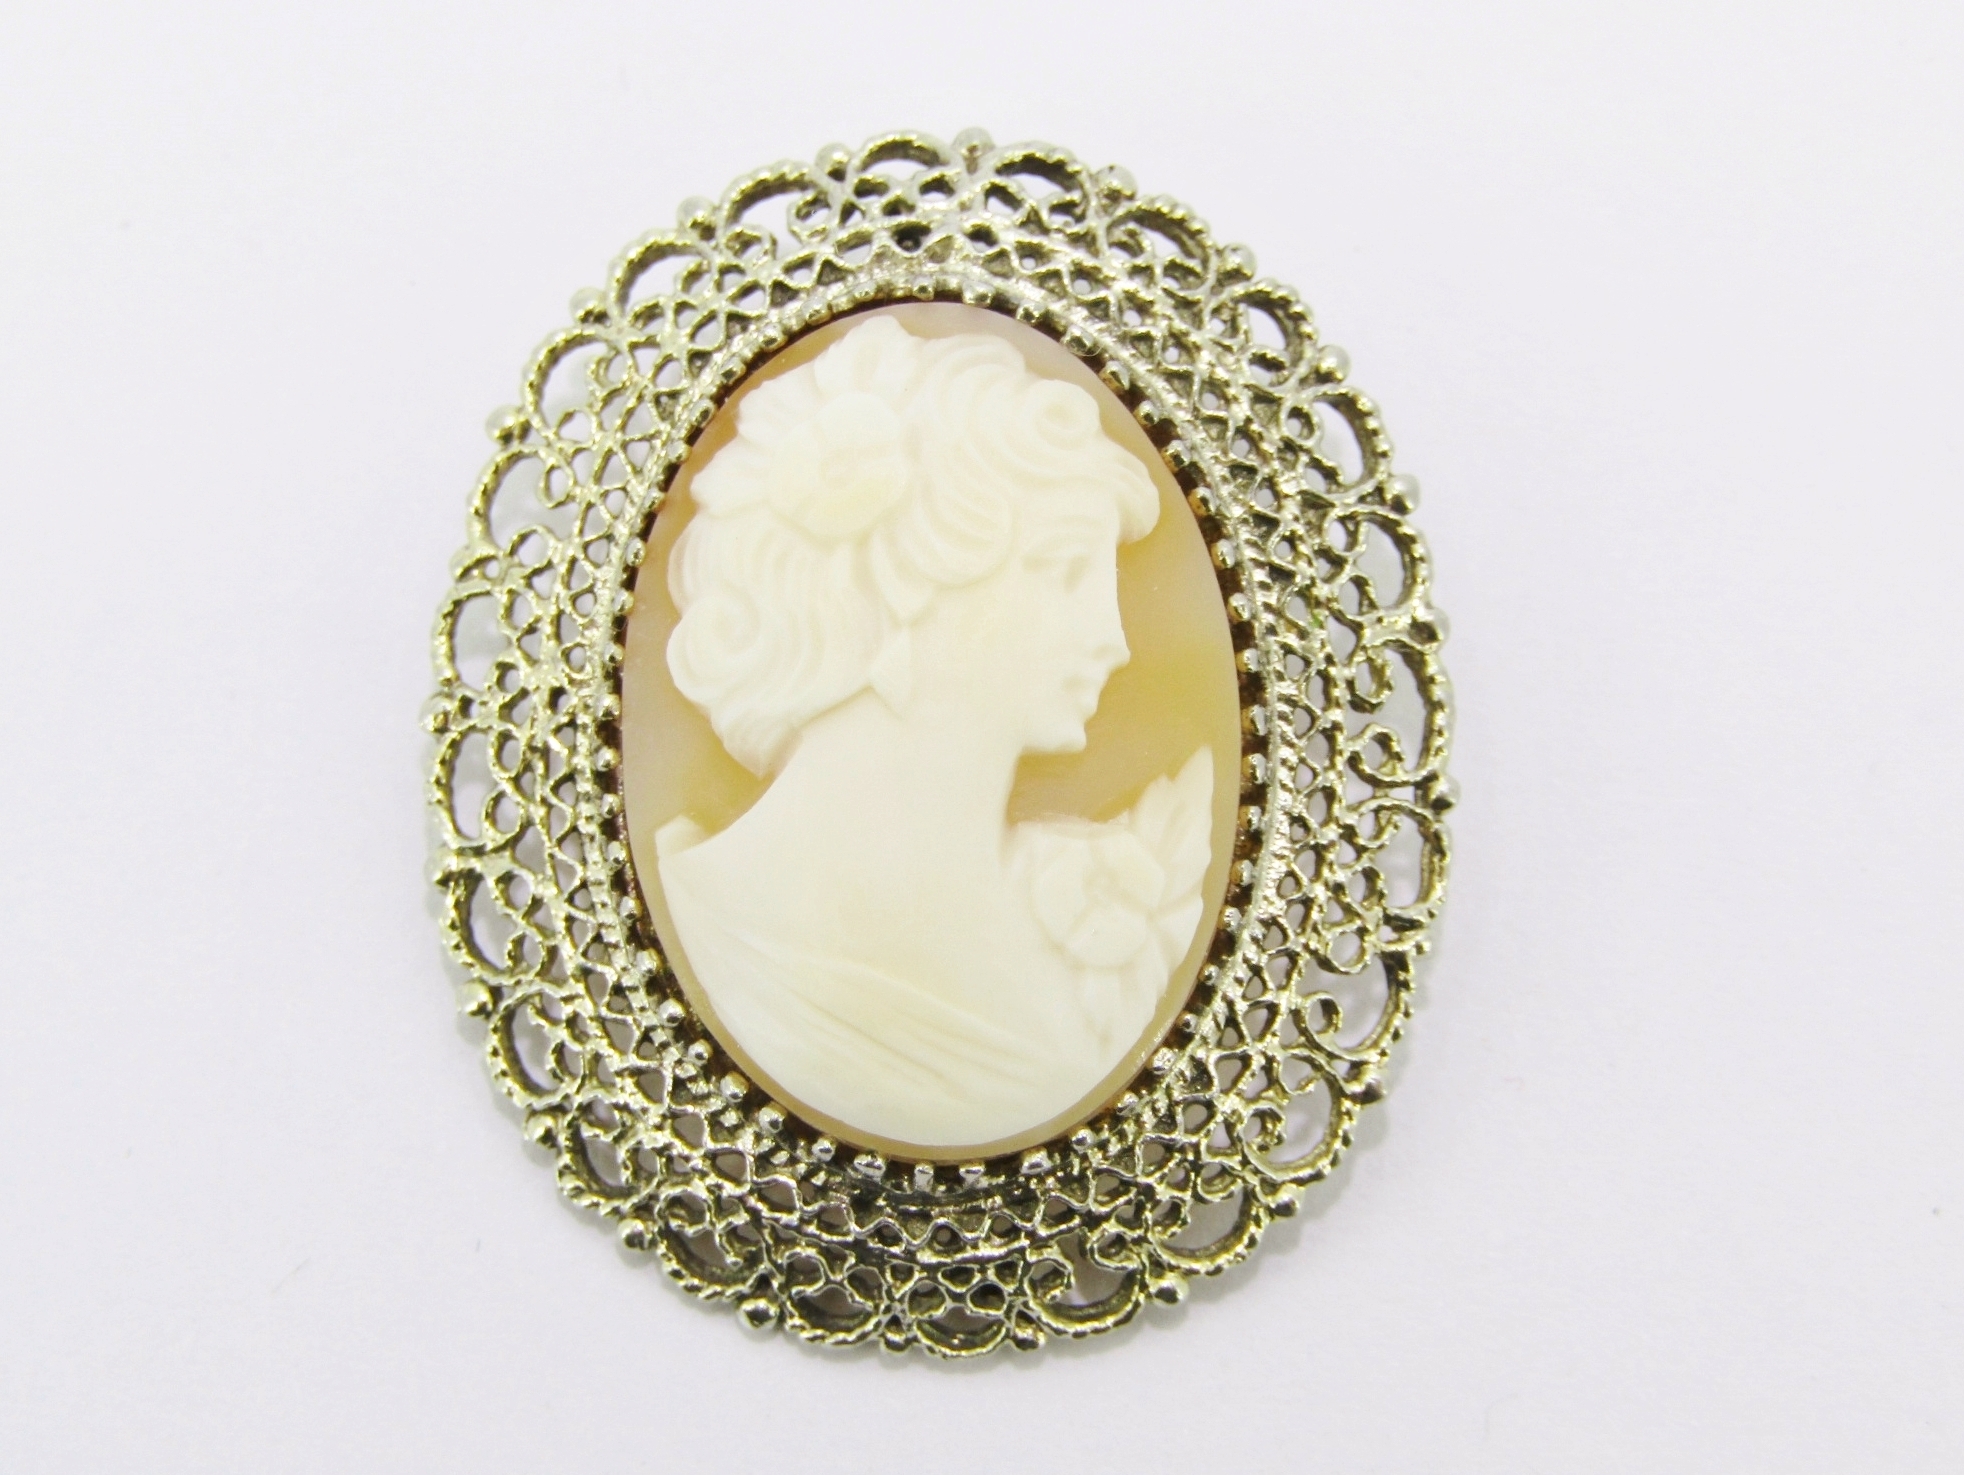 A Beautiful Detailed Filigree Brooch/Pendant in Sterling Silver.